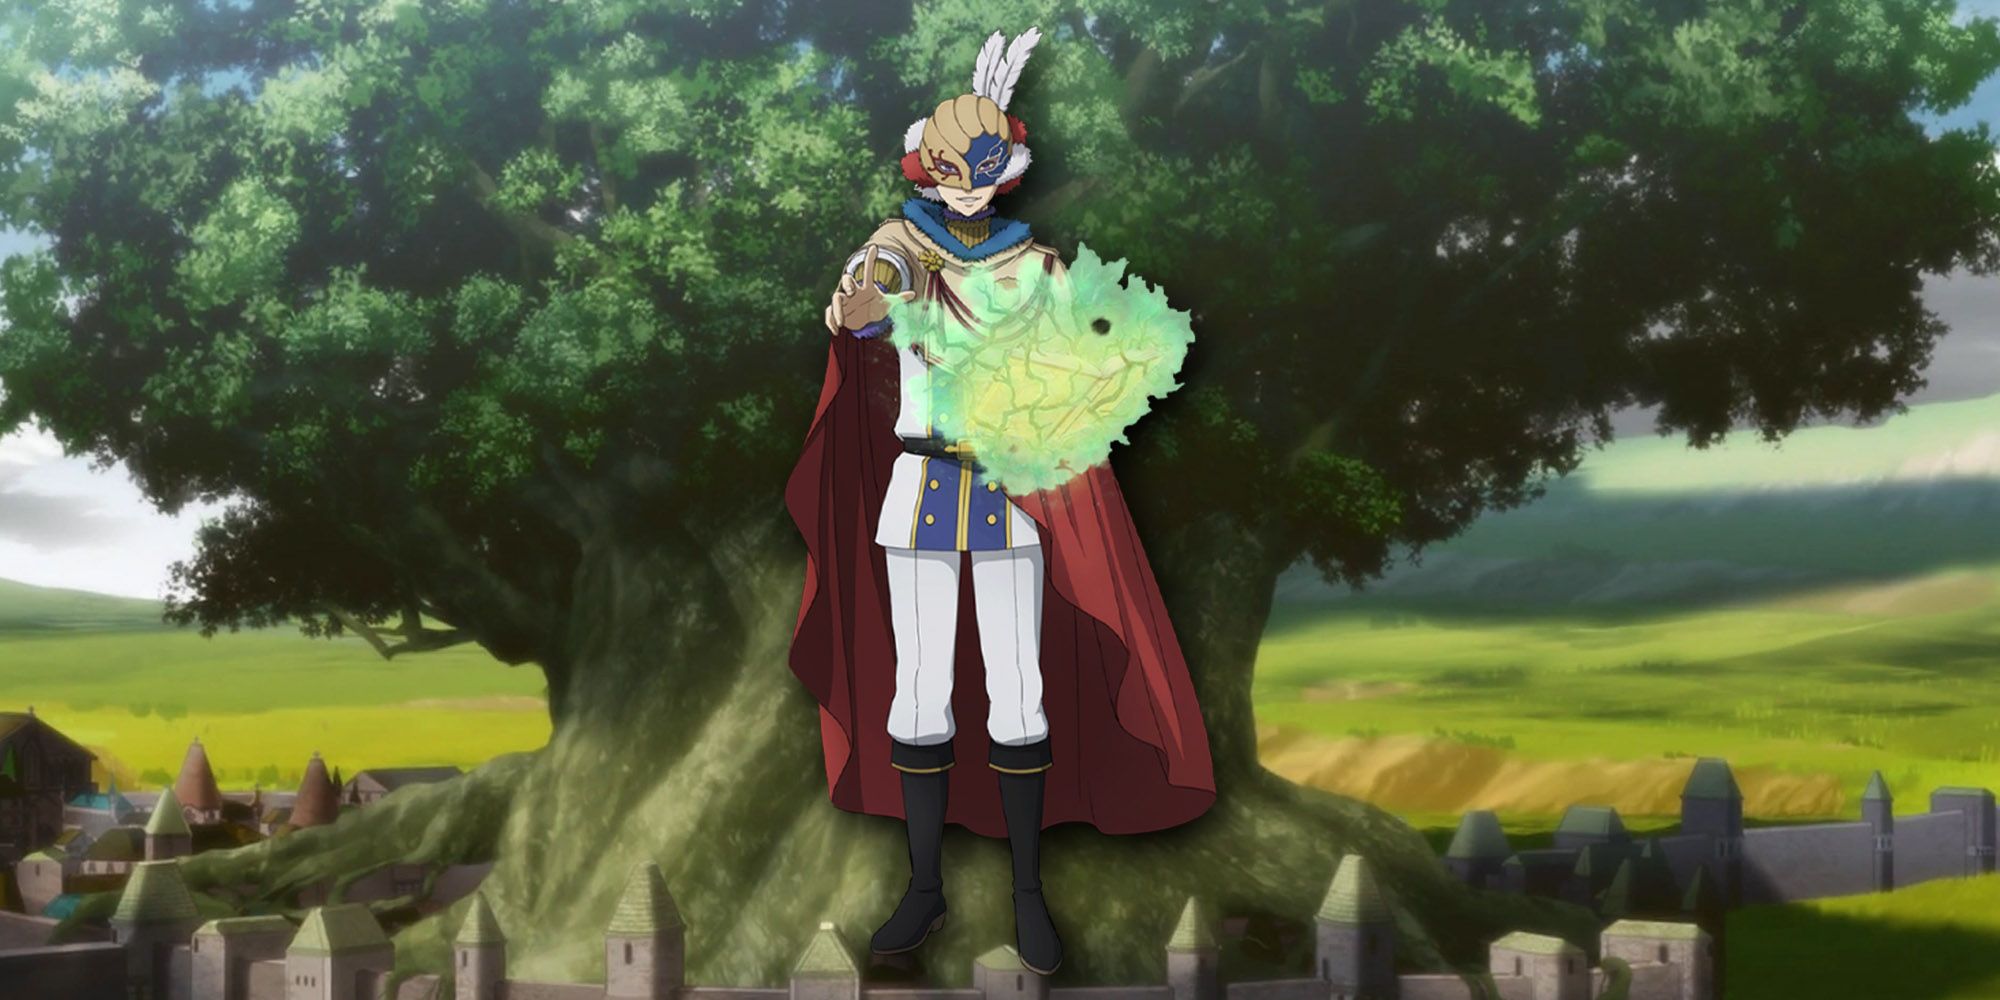 Black Clover - PNG Of William Over One Of The World Trees He Magically Summoned